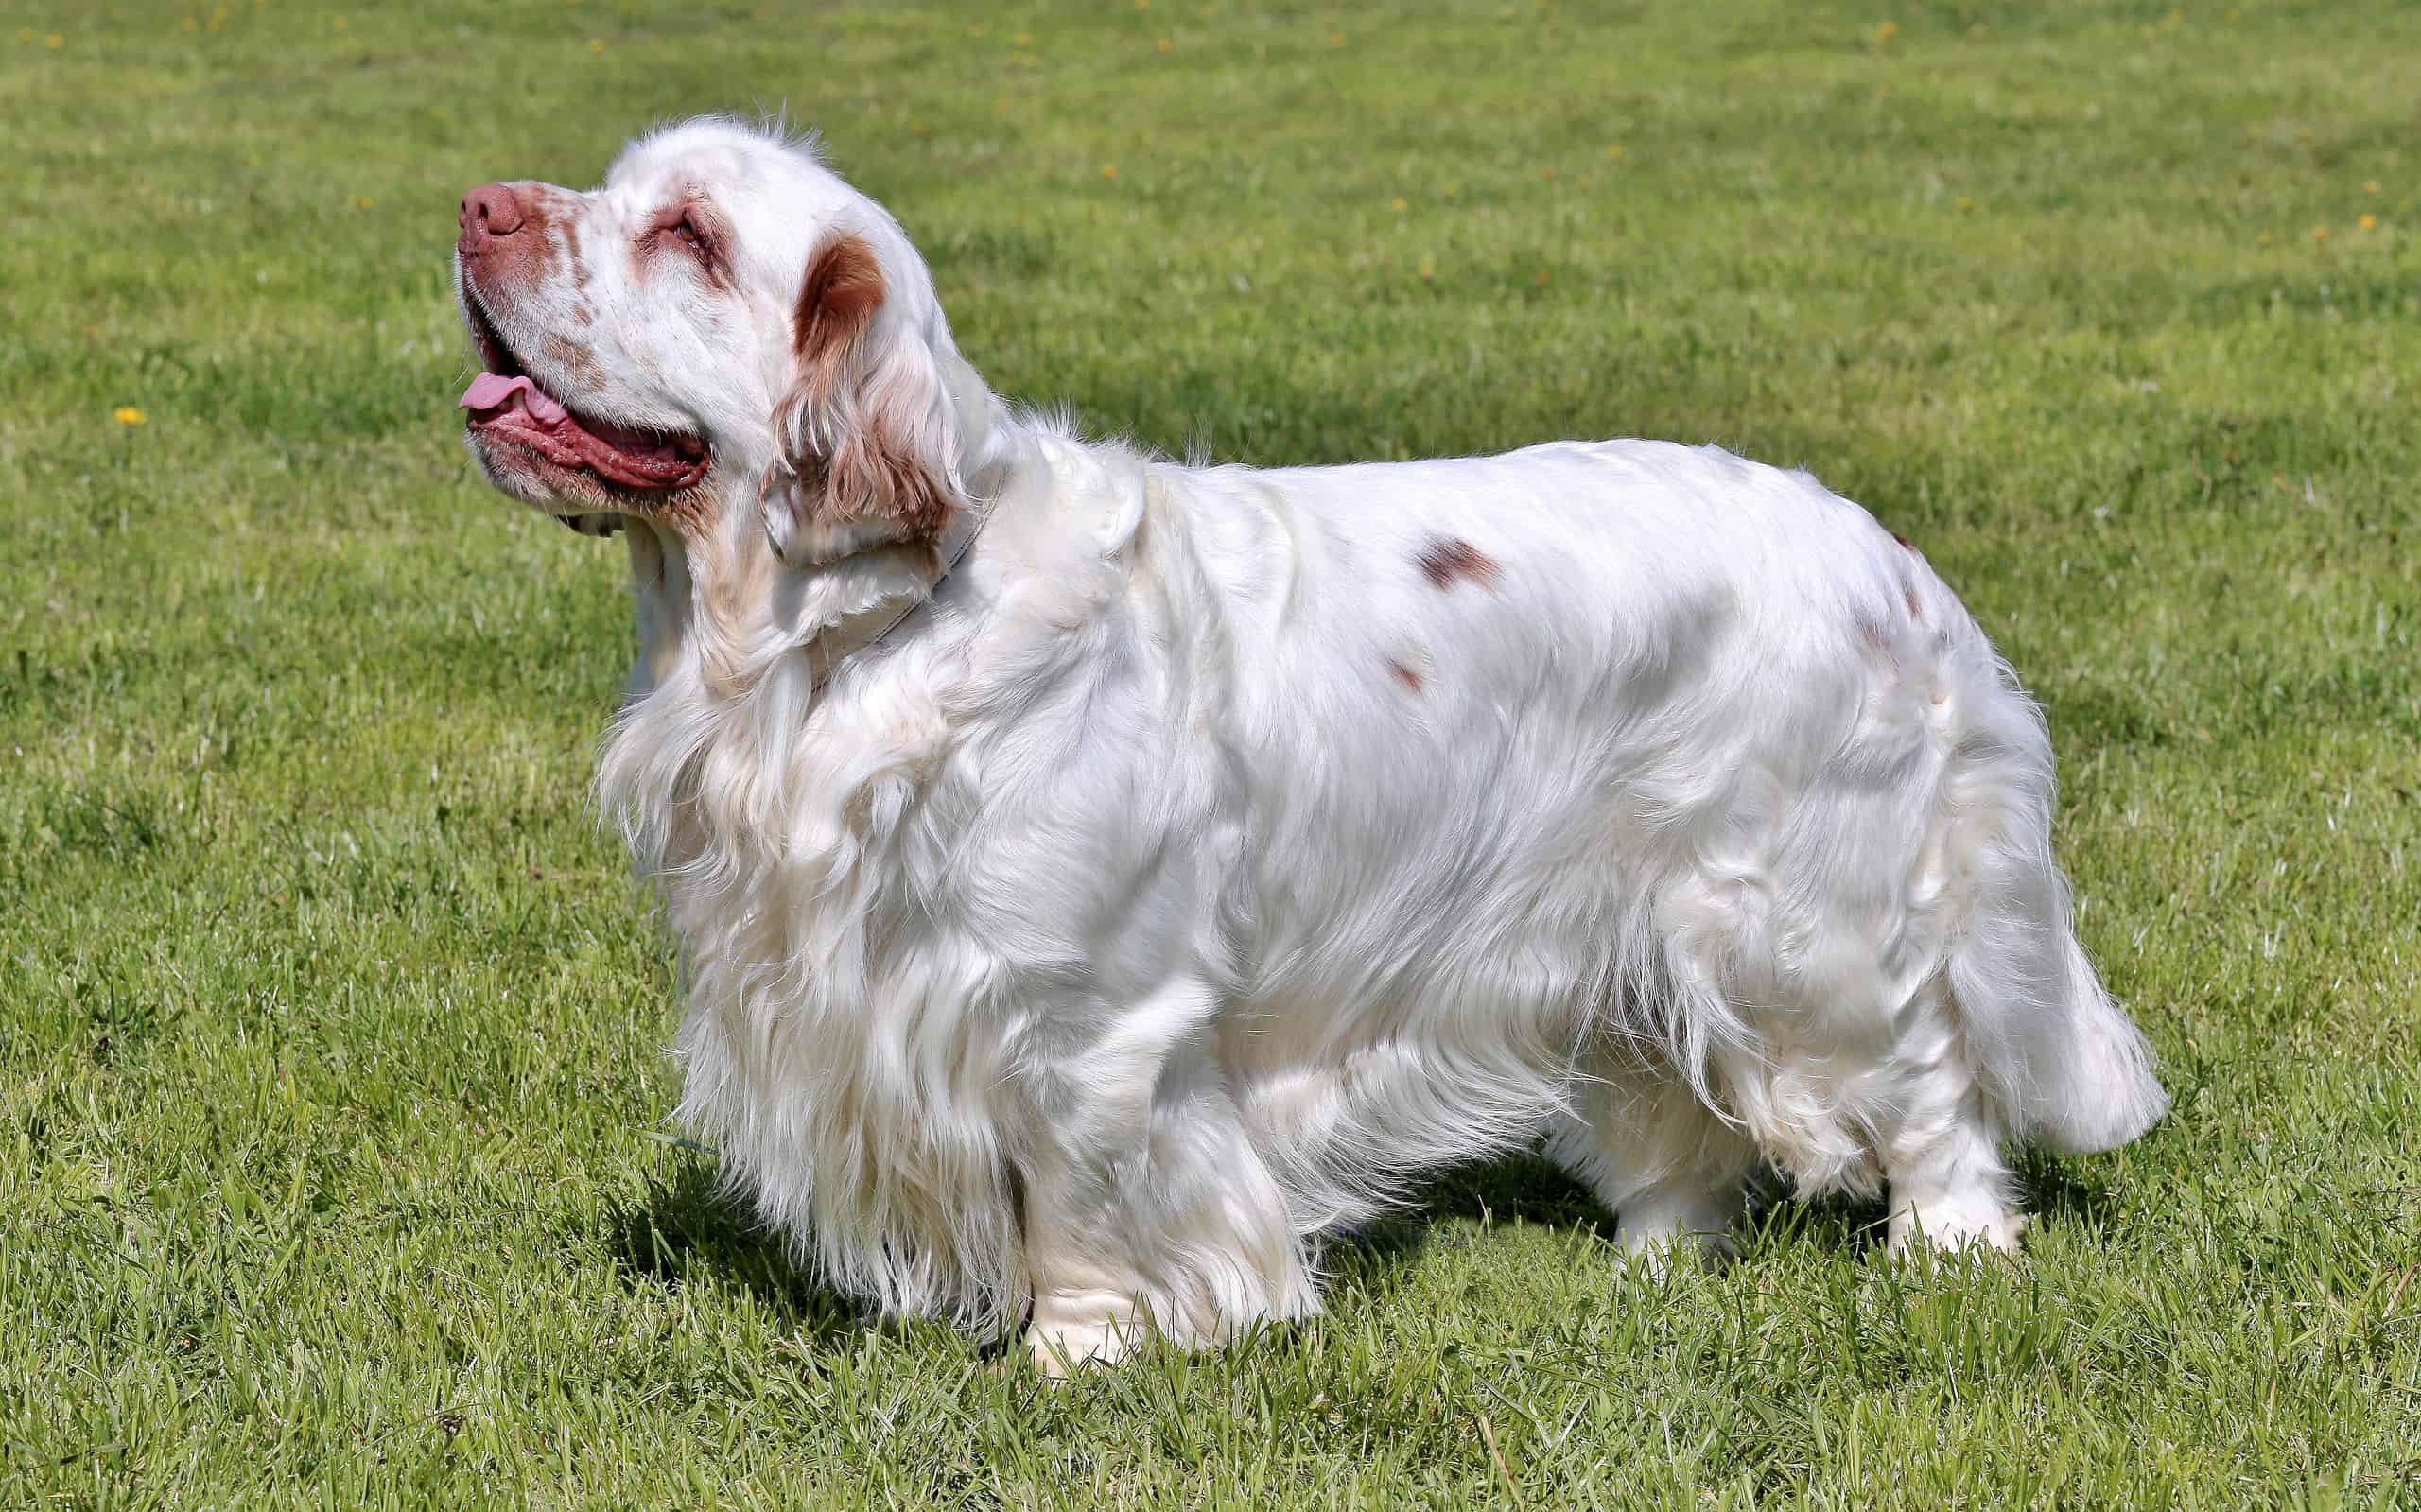 Typical Clumber Spaniel in the garden